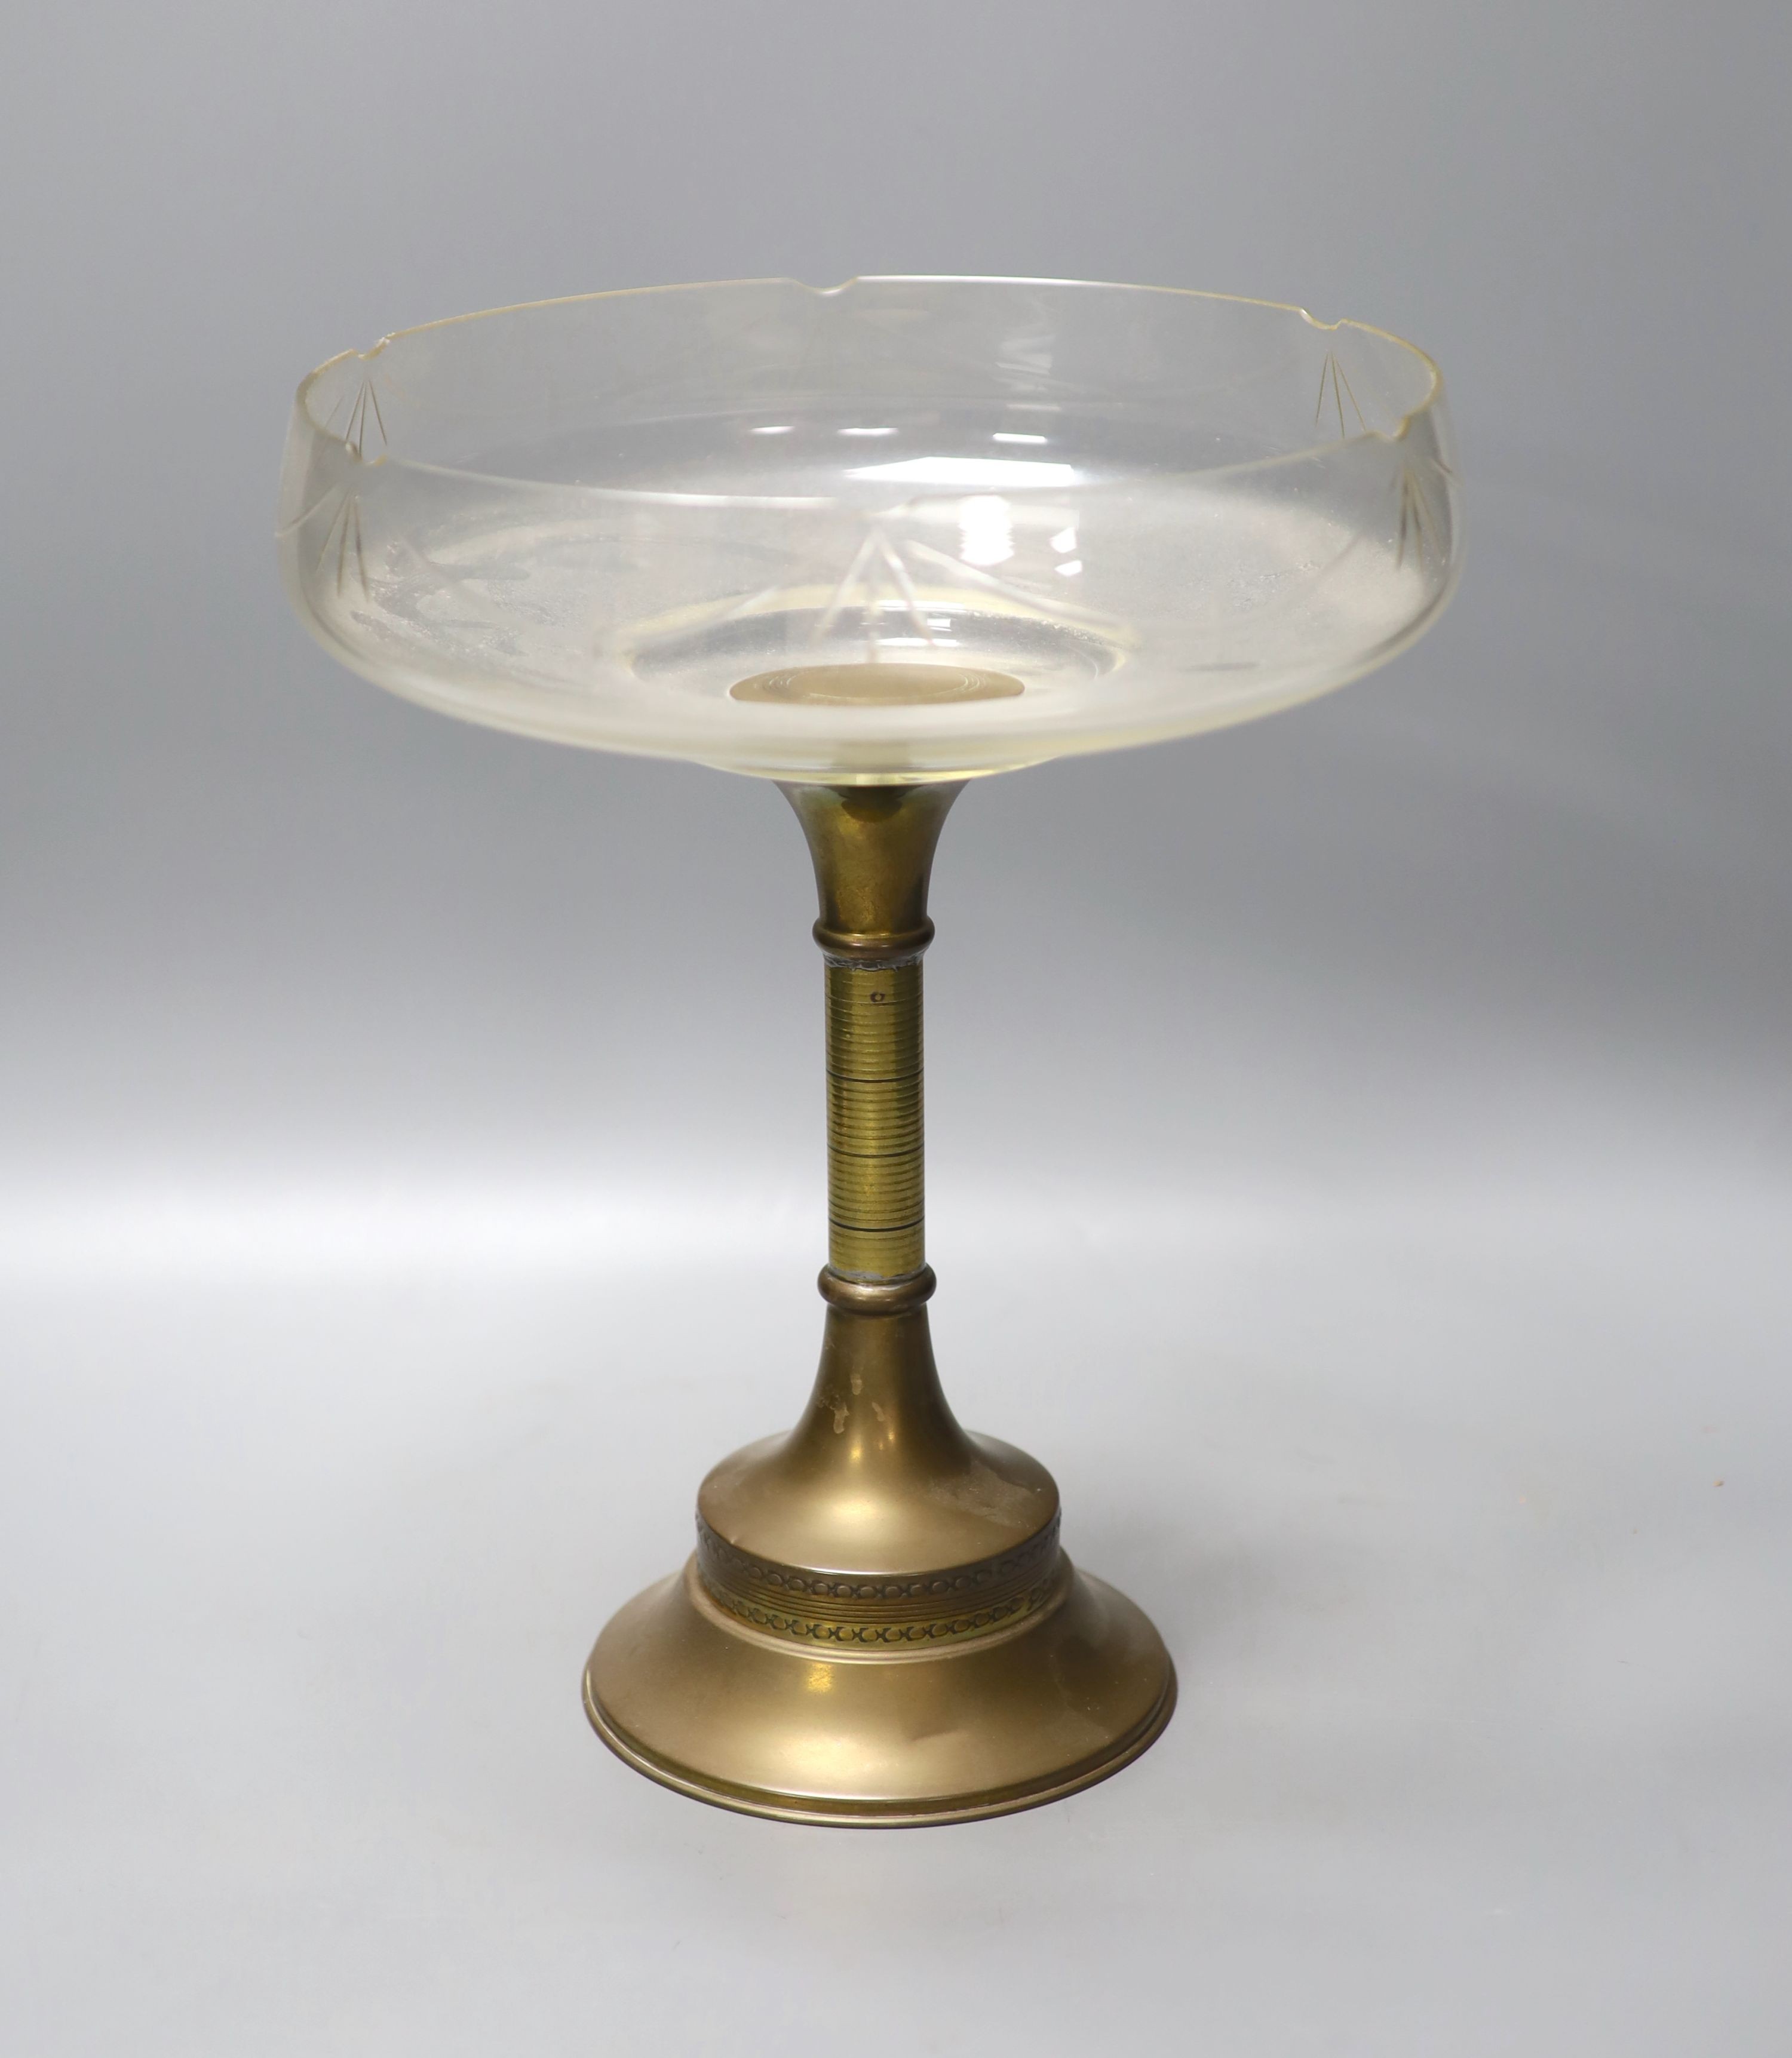 A brass comport with glass bowl, 34. 5 cm high